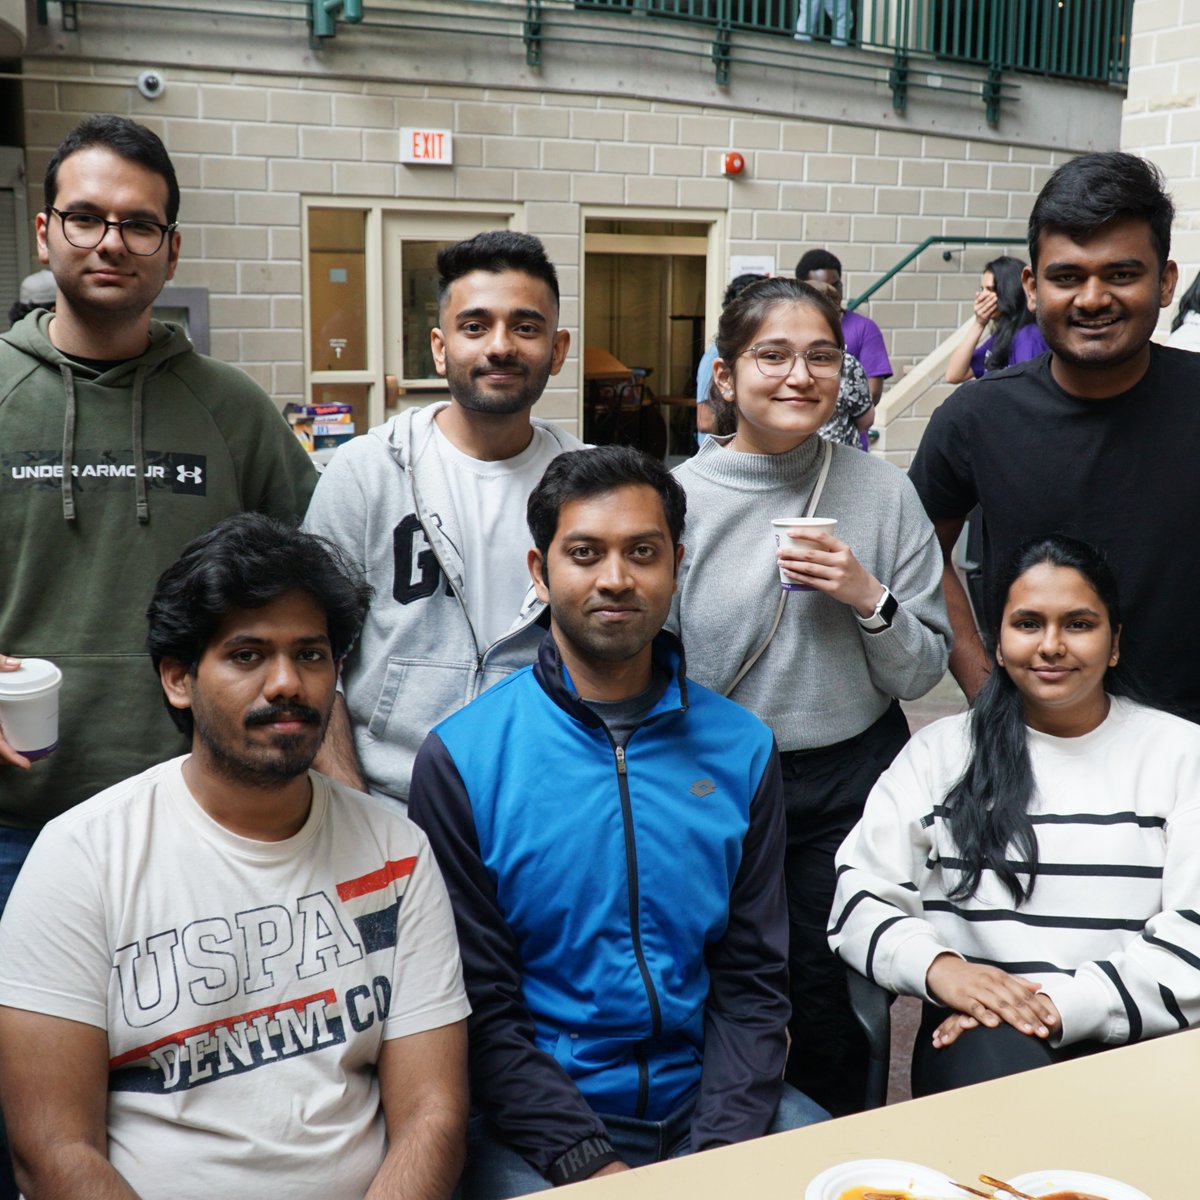 Thanks to those who joined us at the Global Café summer kick off yesterday! We hope you had fun meeting new friends and playing games. Check out session dates for the summer term here iesc.uwo.ca/programs/globa…. @westernU @westernuse @westernsogs